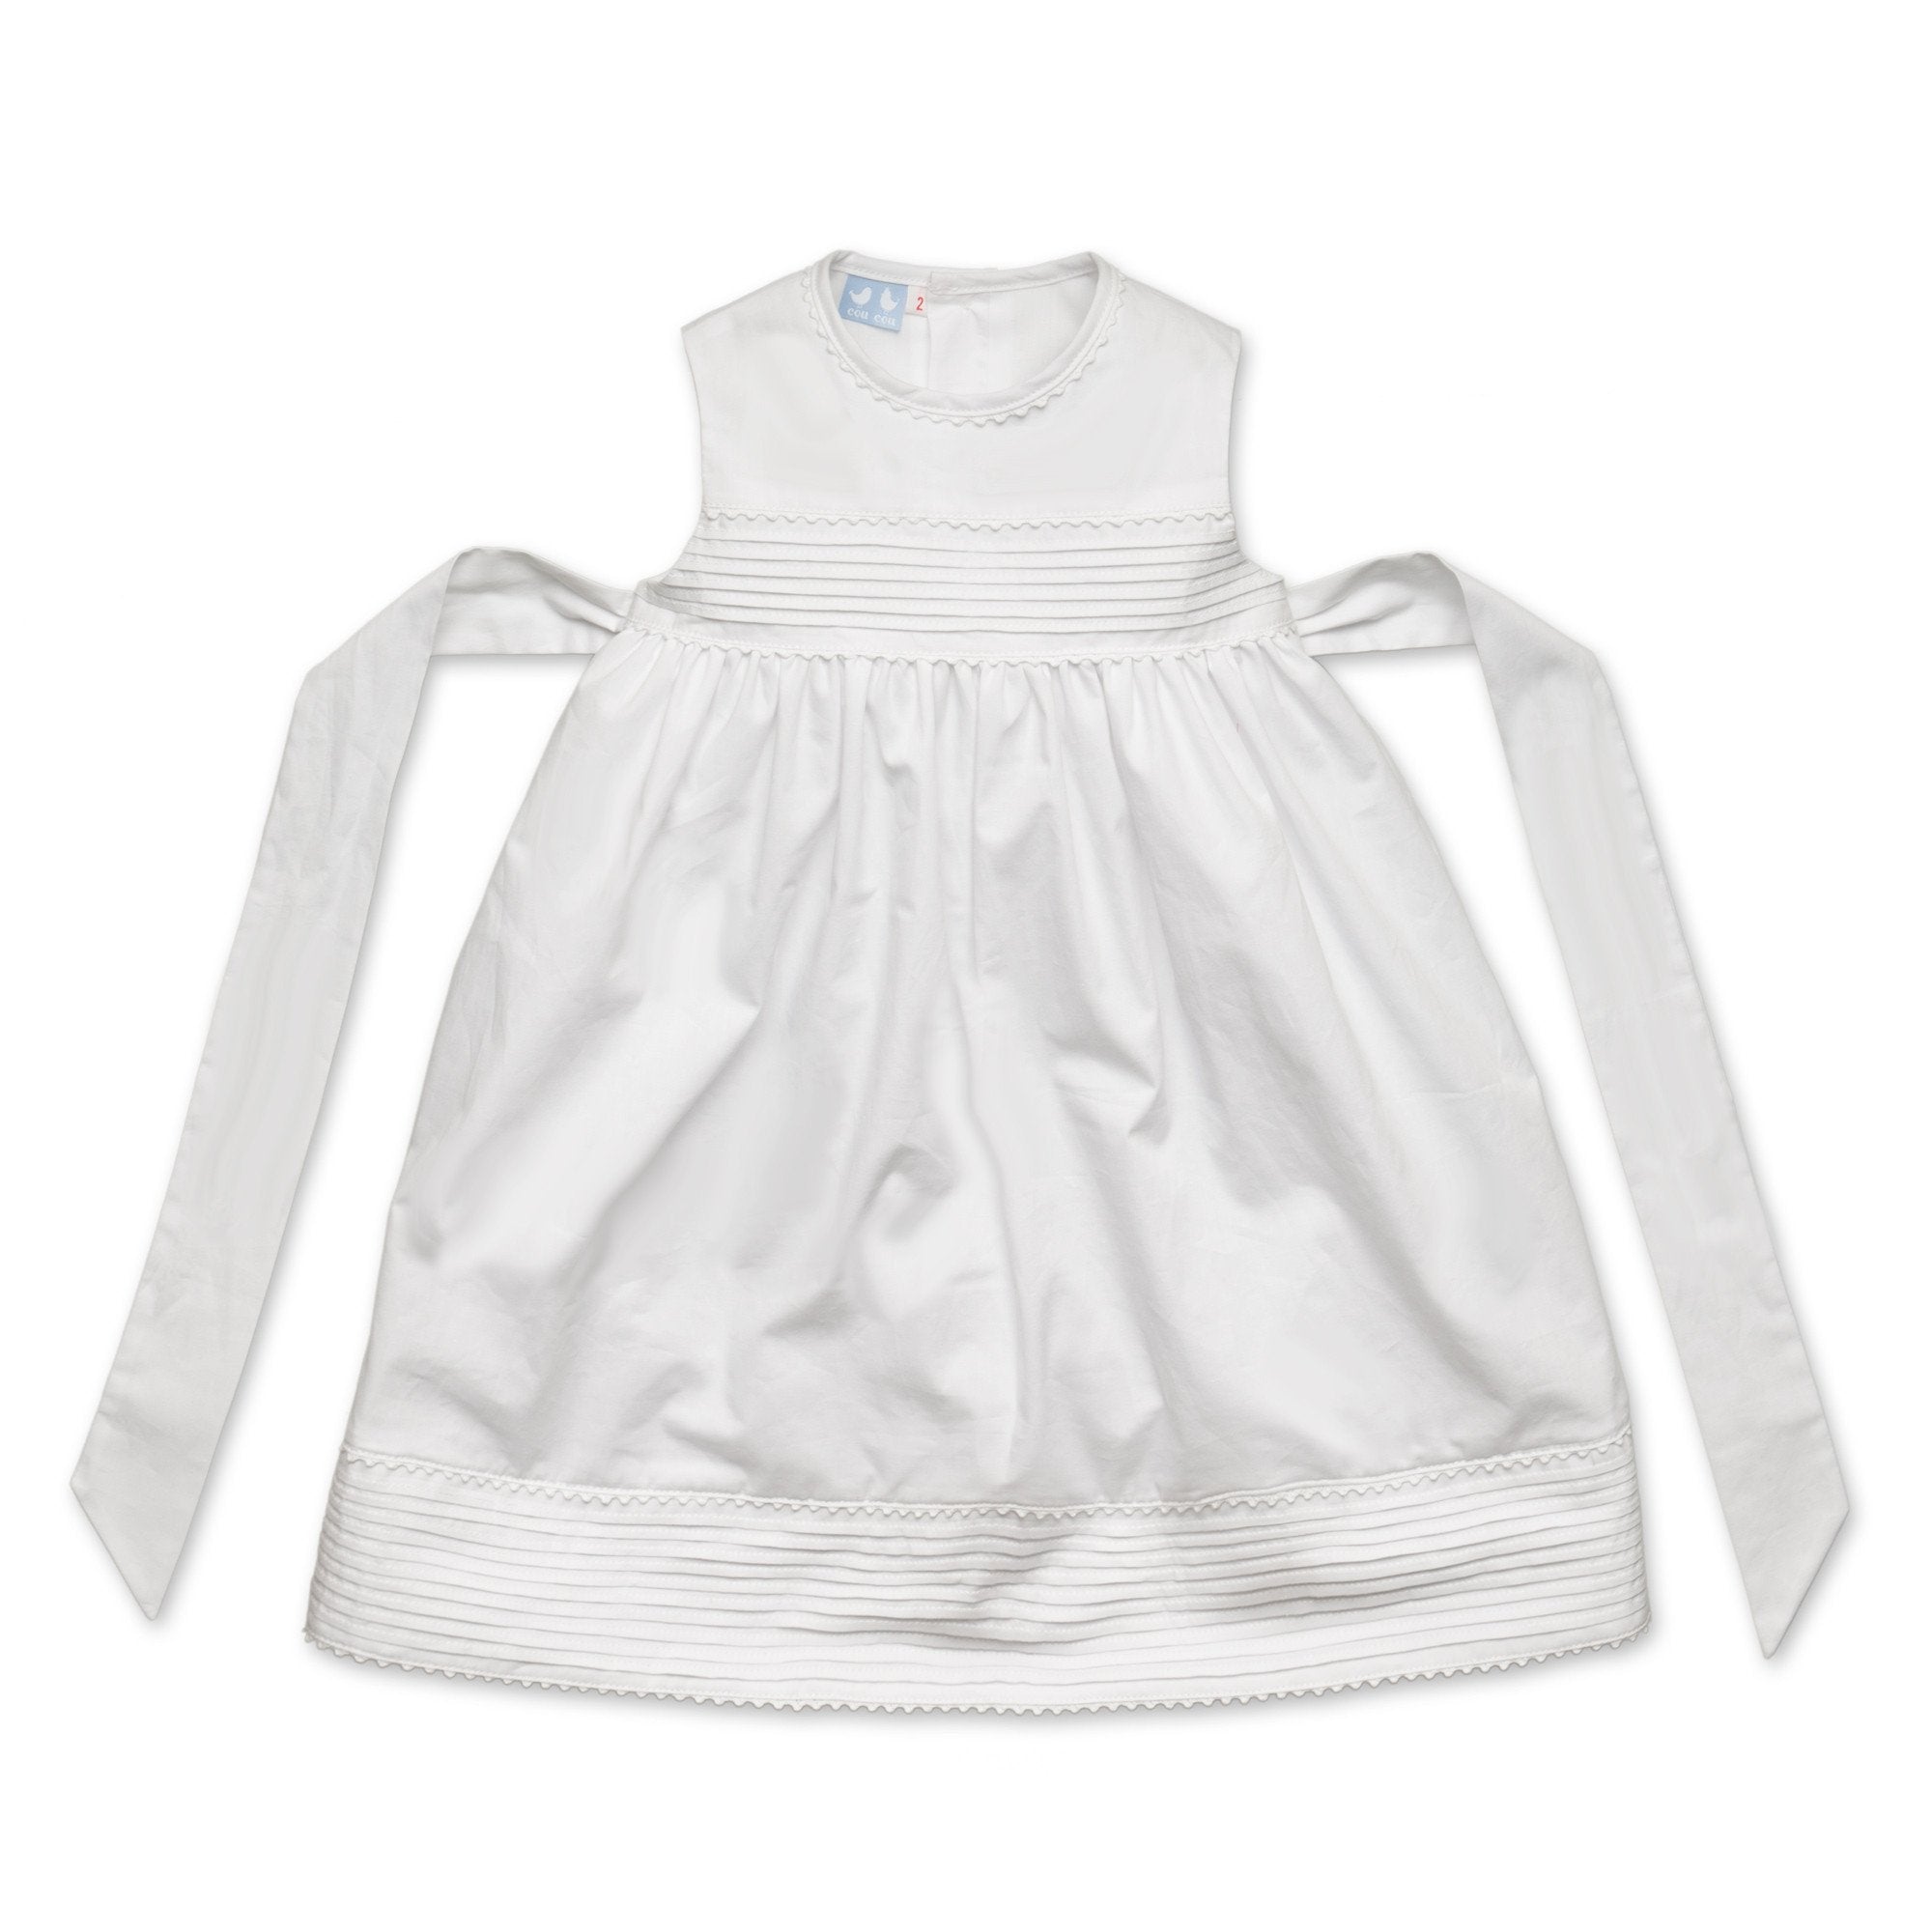 Pleated Dress In White - Cou Cou Baby